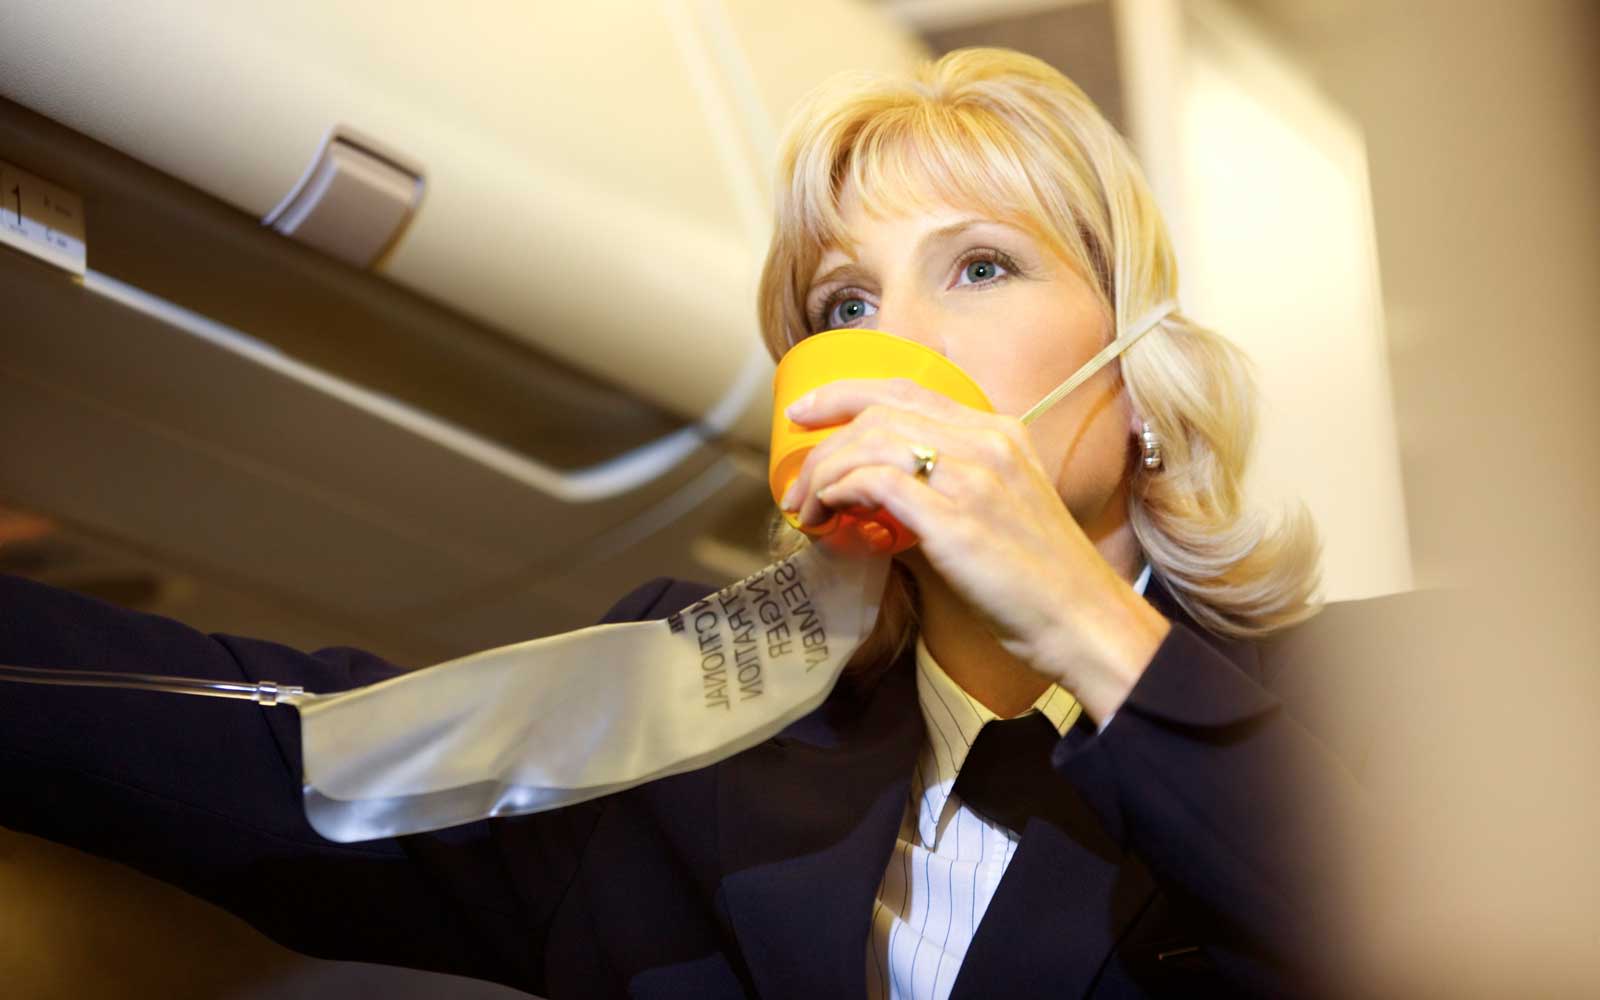 This Is How You Should Use Your Airplane Oxygen Mask